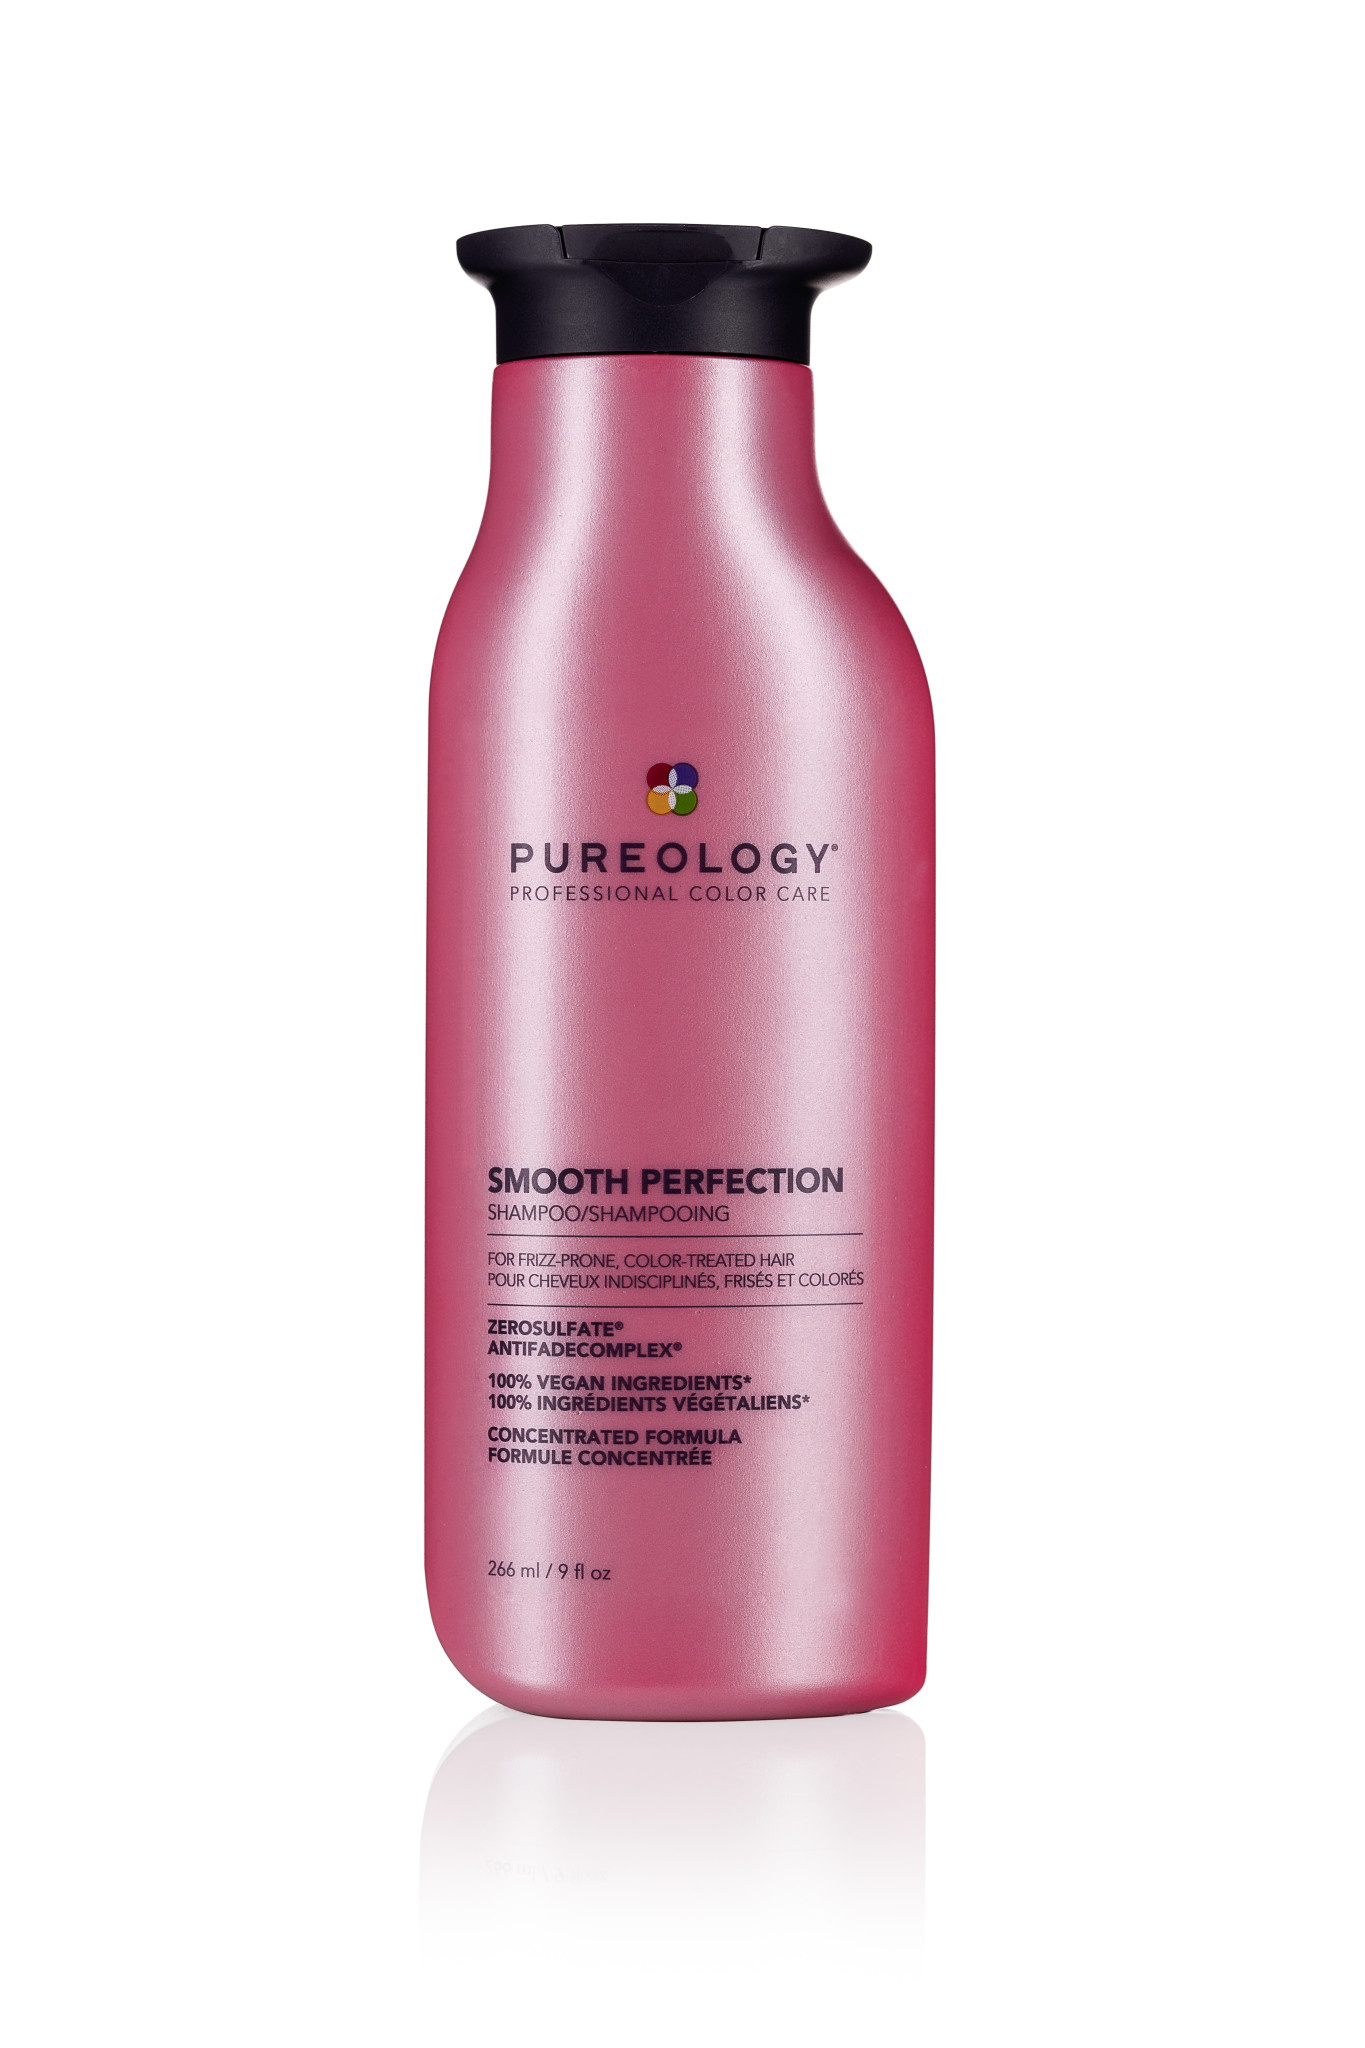 Pureology Smooth Perfection Bundle – Salon500 Online